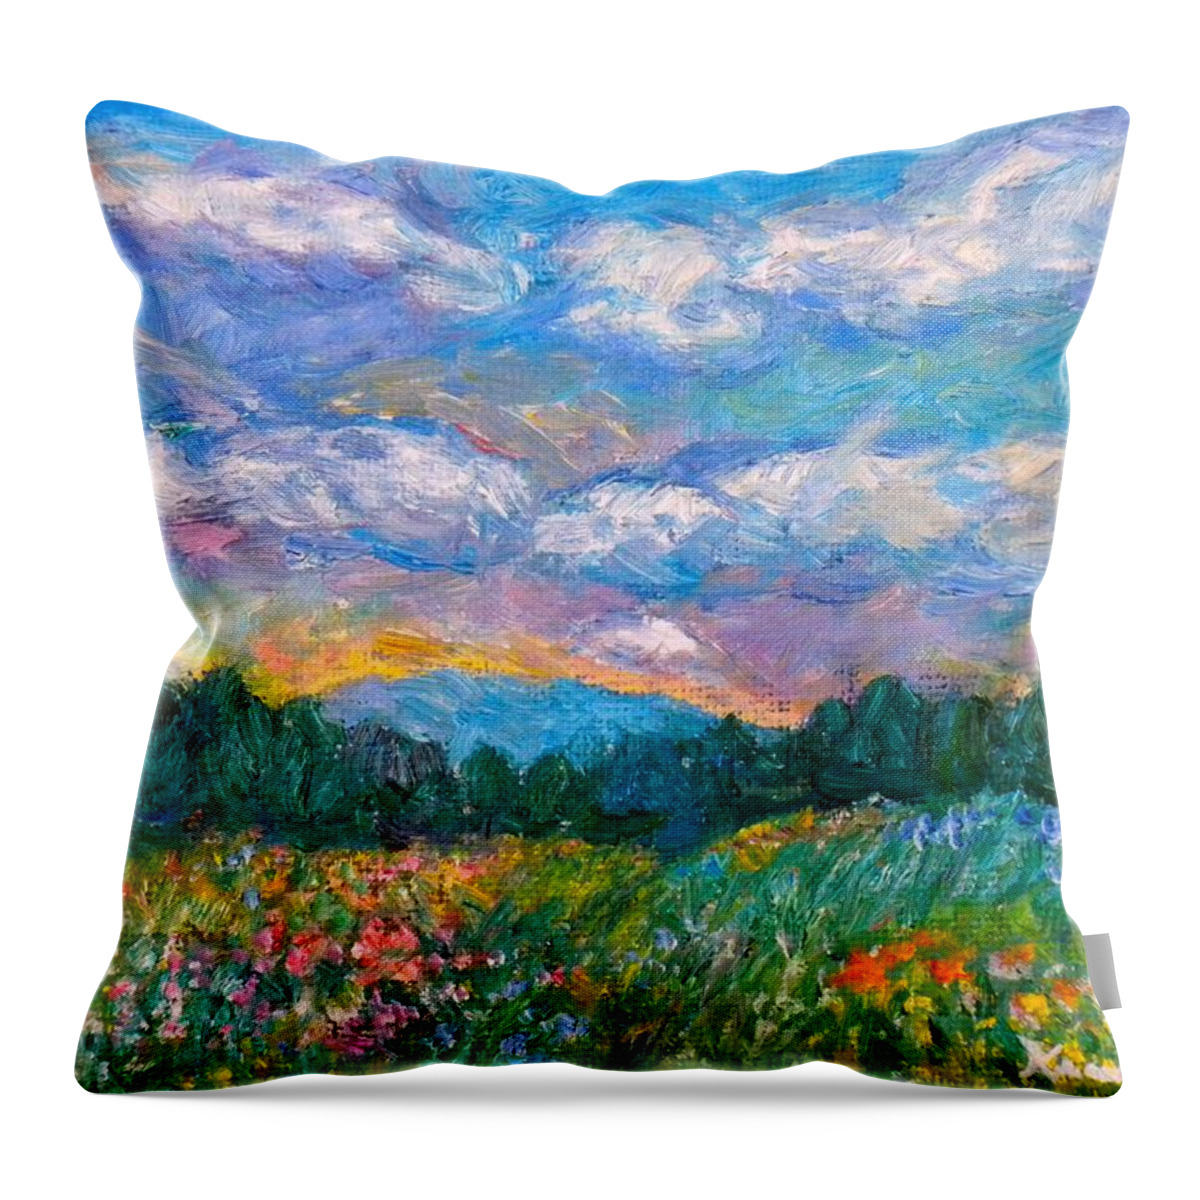 Landscape Throw Pillow featuring the painting Blue Ridge Wildflowers by Kendall Kessler